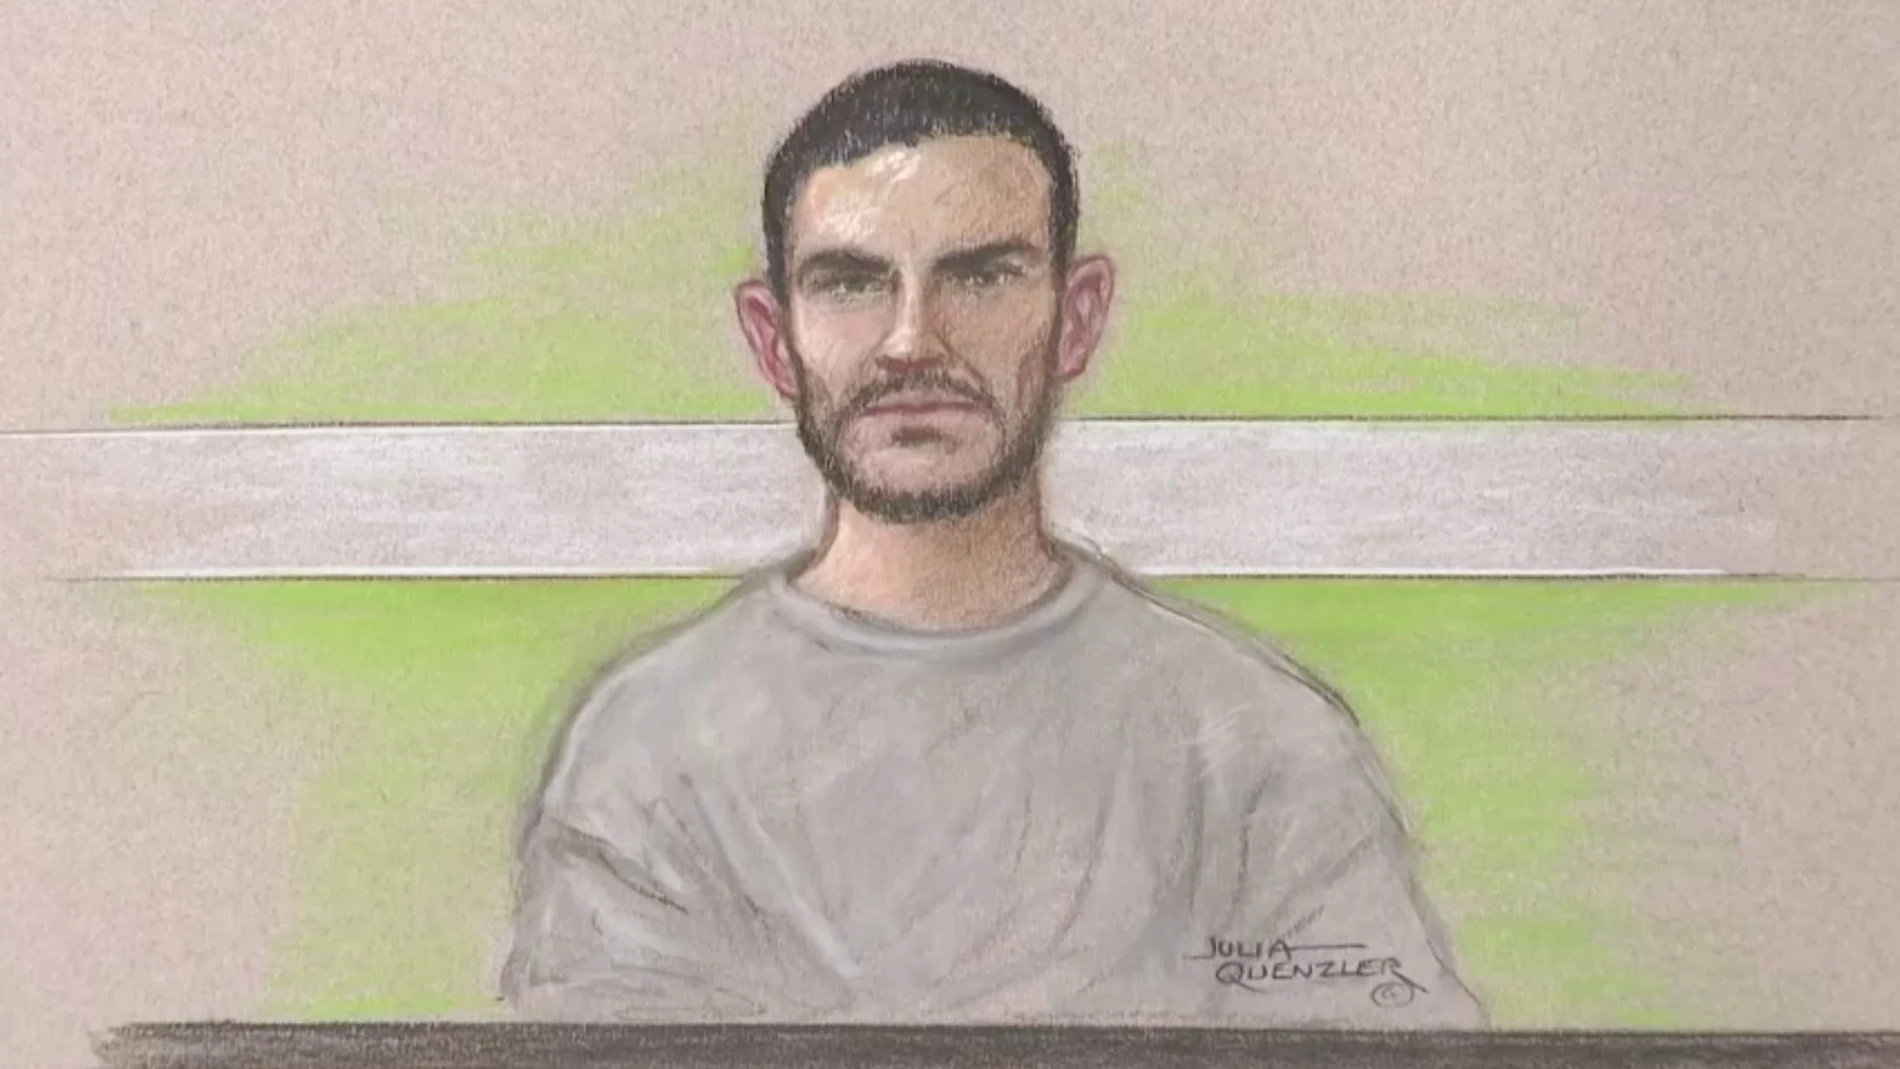 Maurice Robinson, the driver of a truck in which 39 people were found dead, is seen in a courtroom sketch in Chelmsford